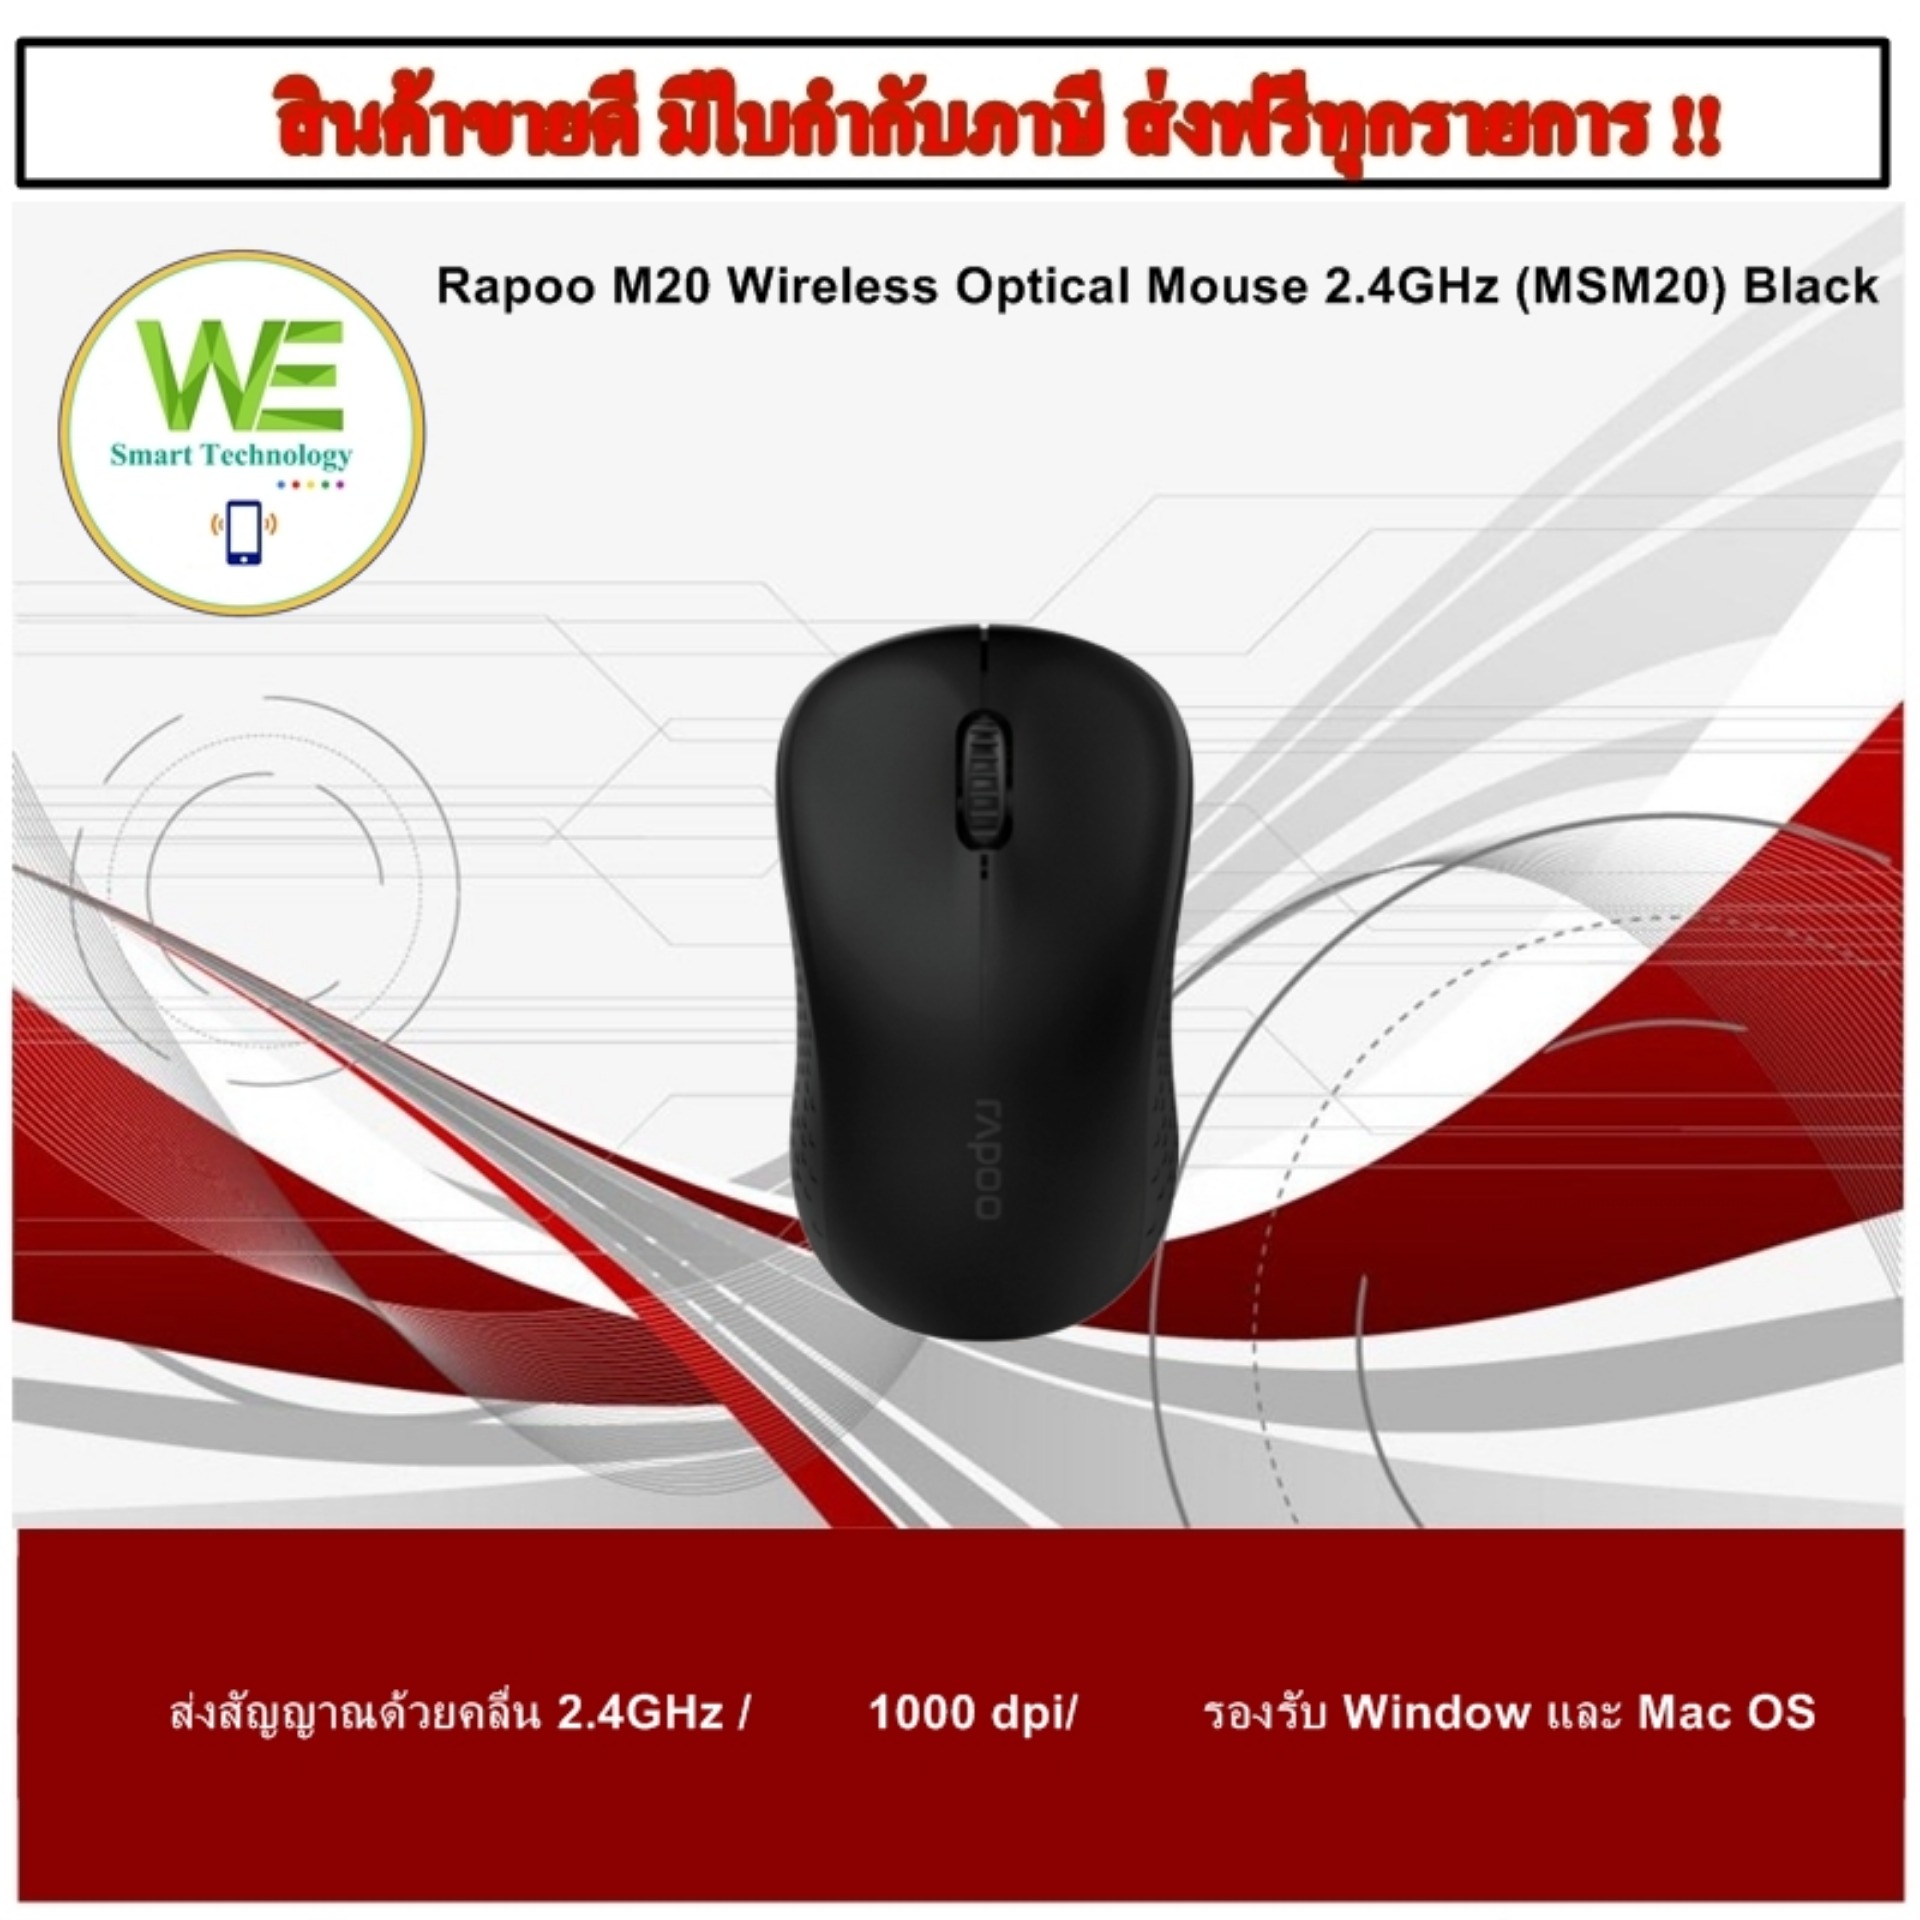 Rapoo M20 Wireless Optical Mouse 2.4GHz (MSM20) /Wireless Optical Mouse 1620 , Wireless USB